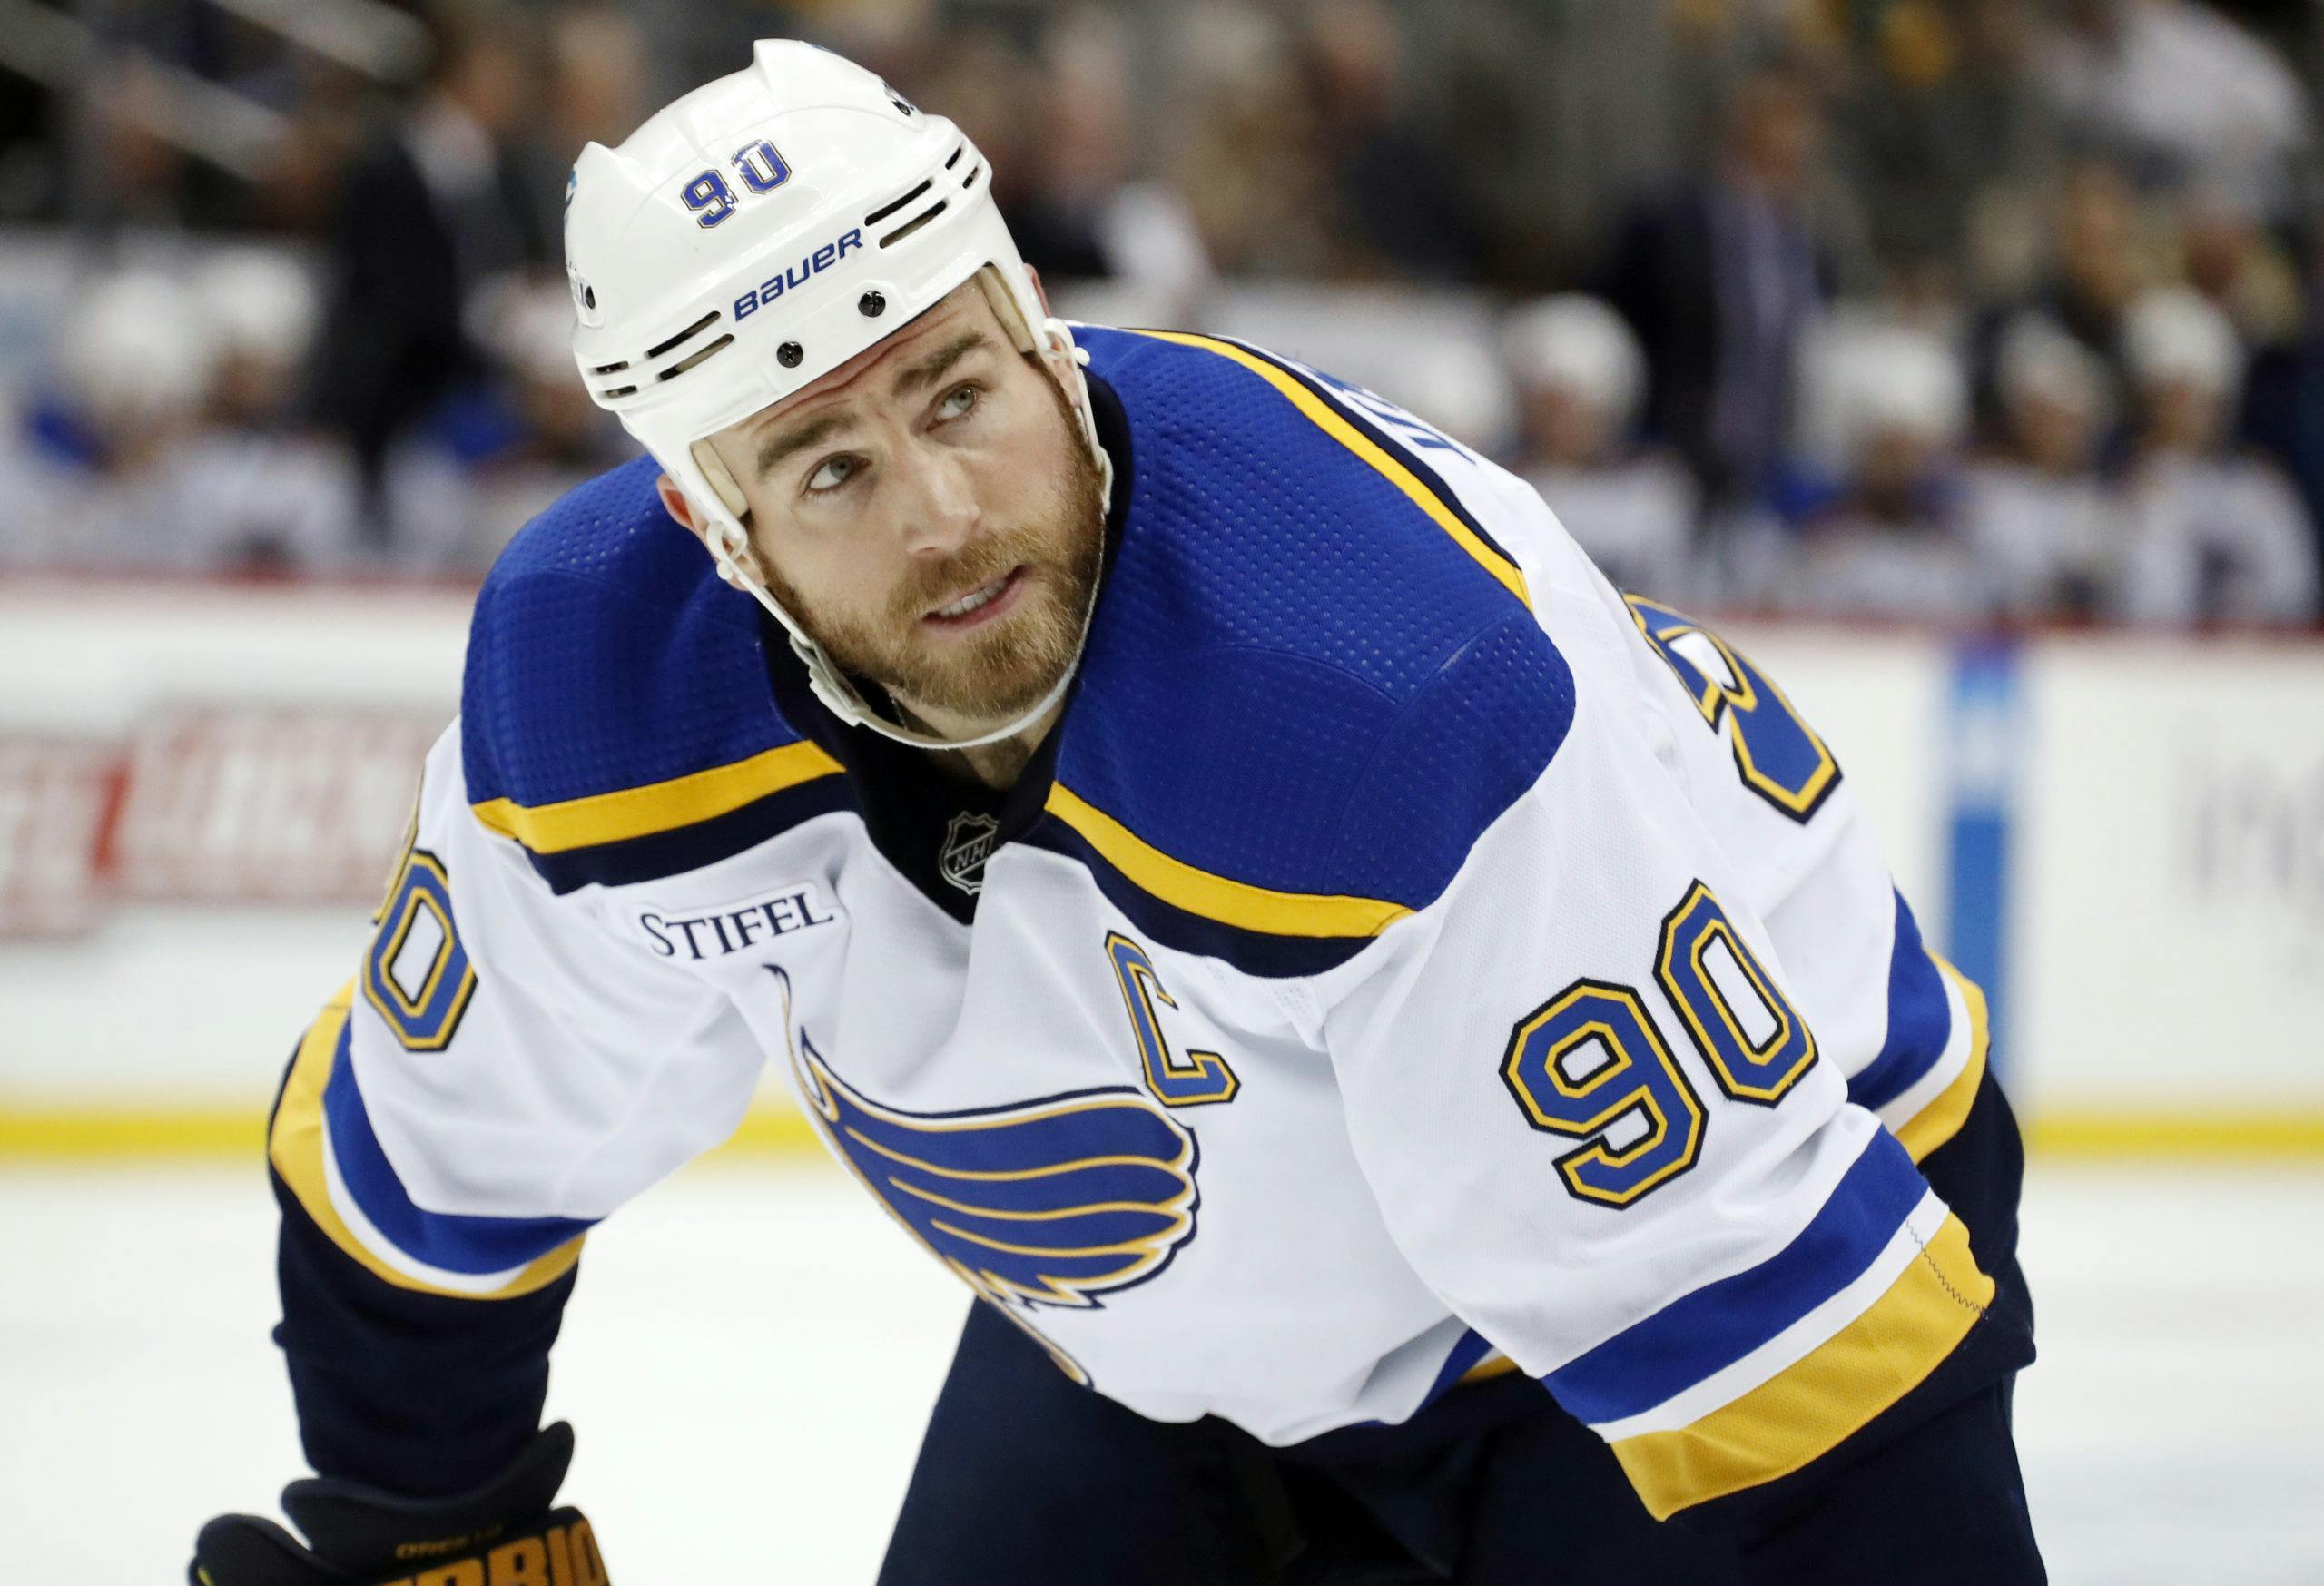 Big update on the Ryan O'Reilly injury from Sheldon Keefe